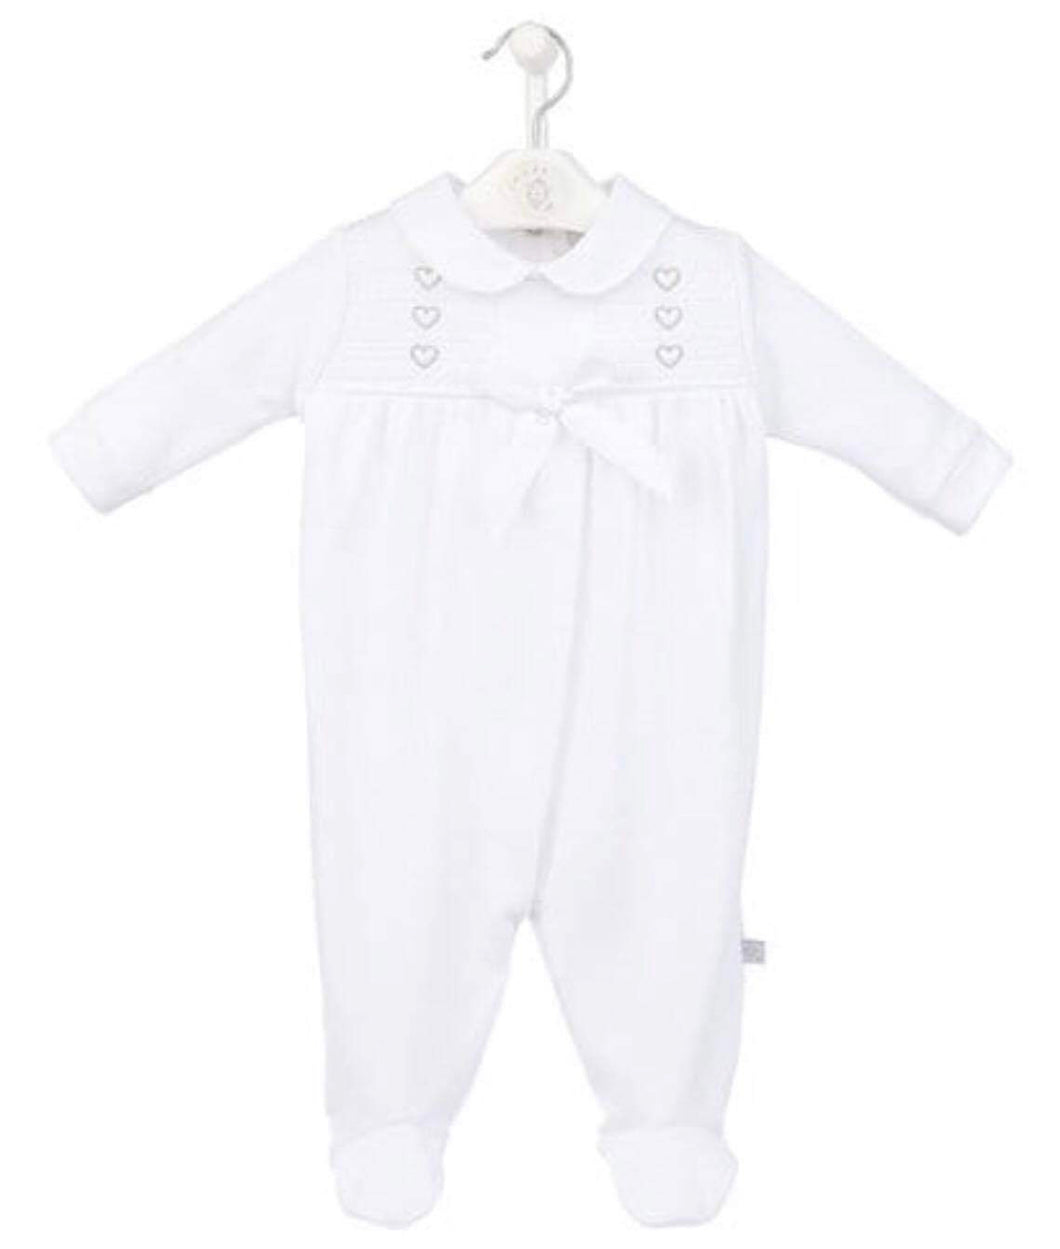 Hearts and bows white sleepsuit